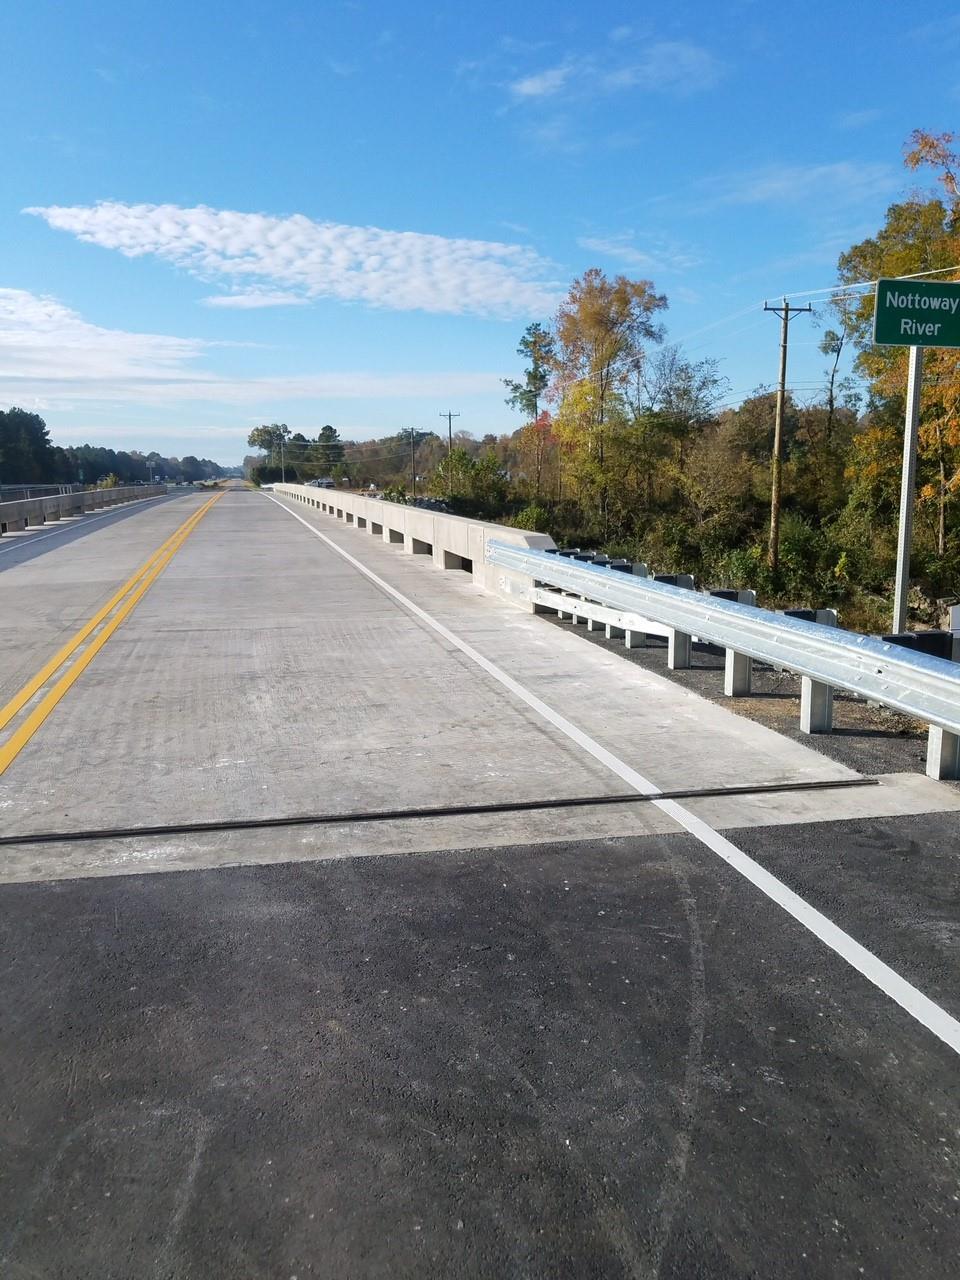 US-301 OVER THE NOTTOWAY RIVER SUSSEX